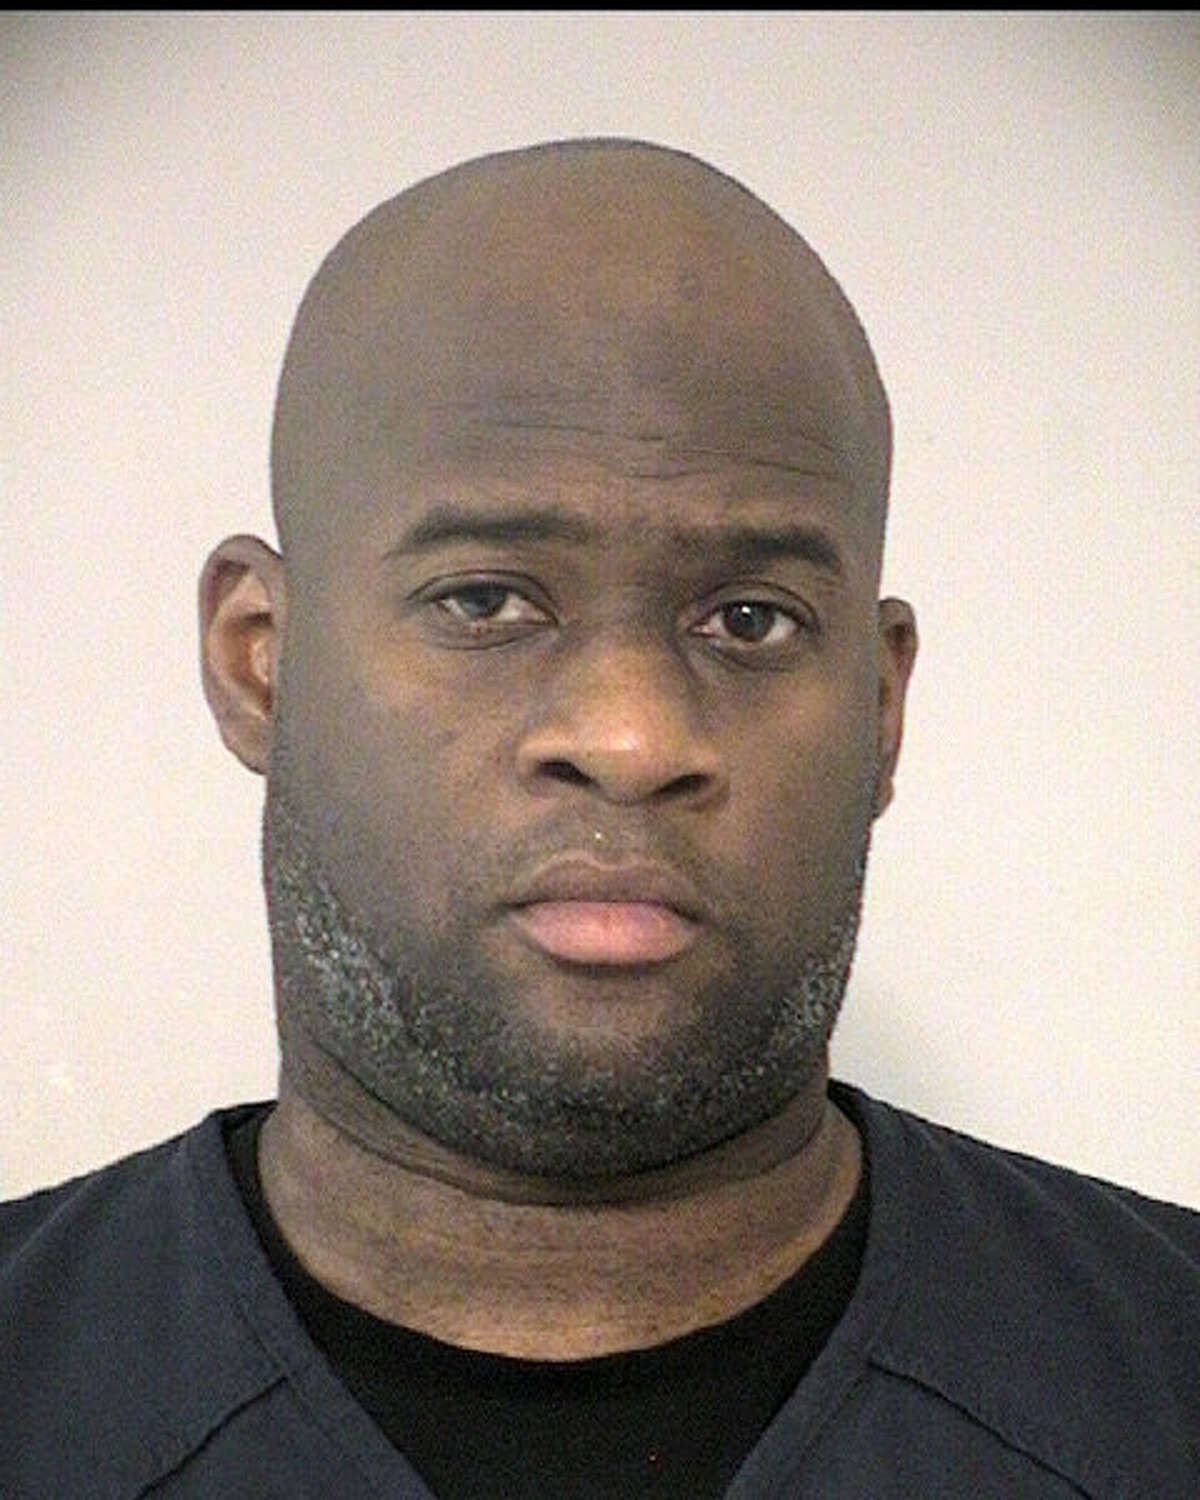 Former Texas Longhorns quarterback Vince Young was arrested in Fort Bend County after being accused of drunk driving — the football star's second DWI charge in three years.